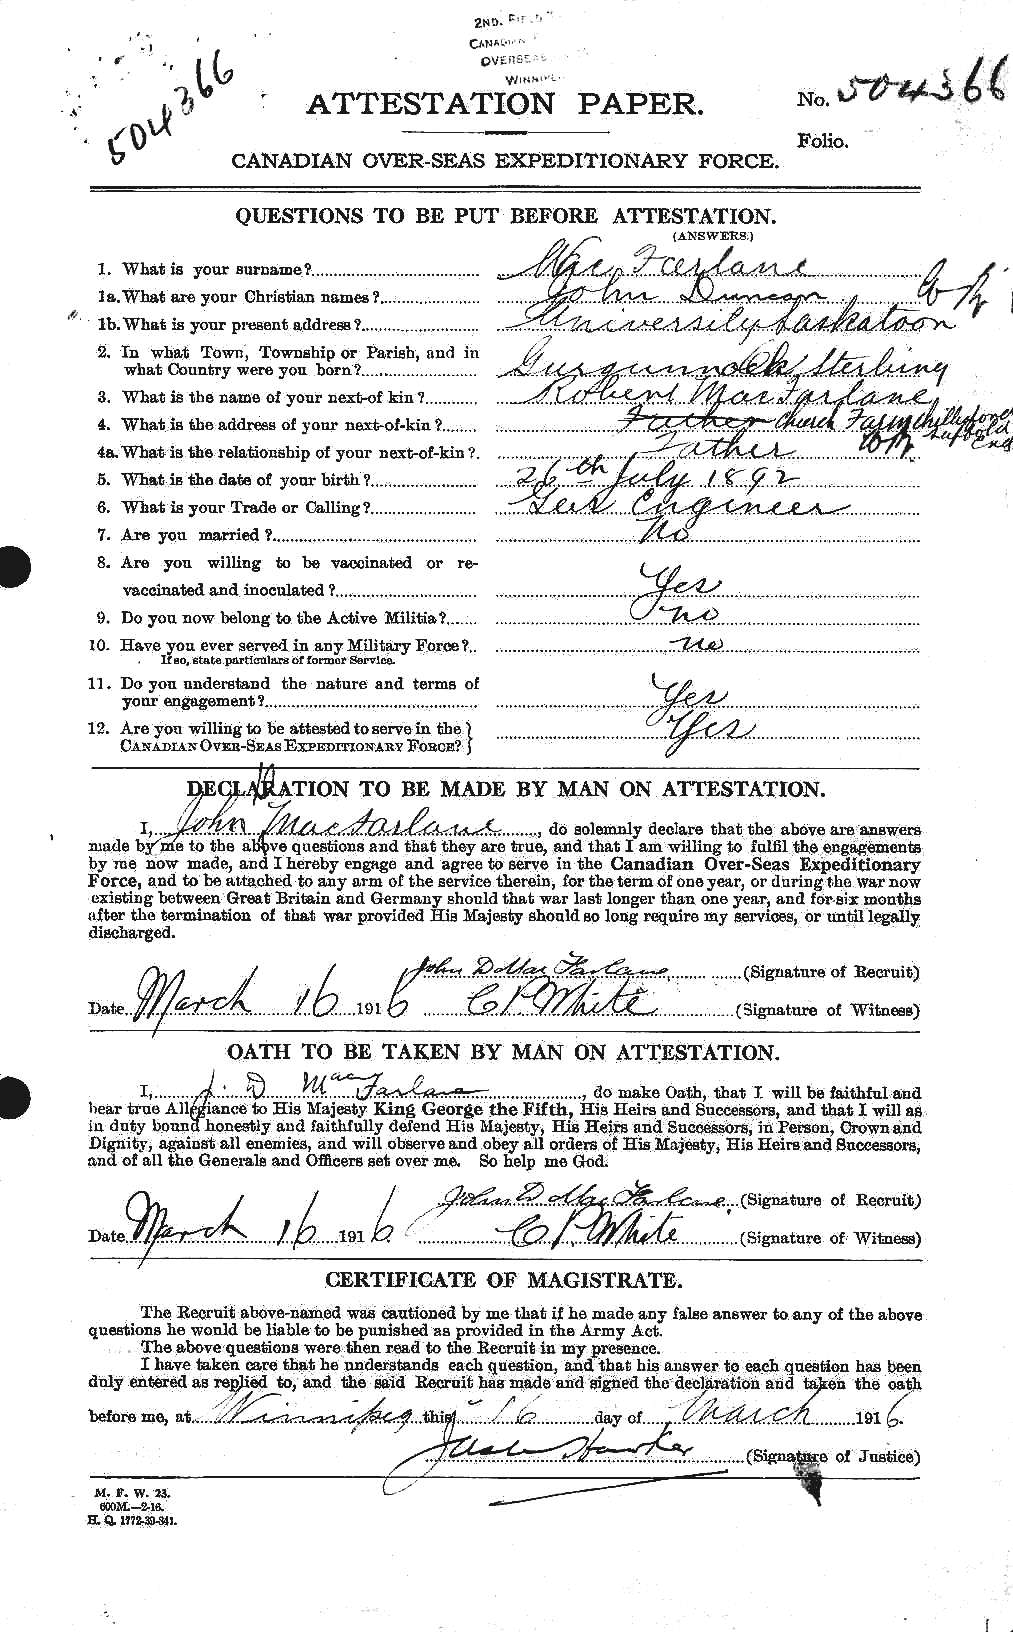 Personnel Records of the First World War - CEF 522688a